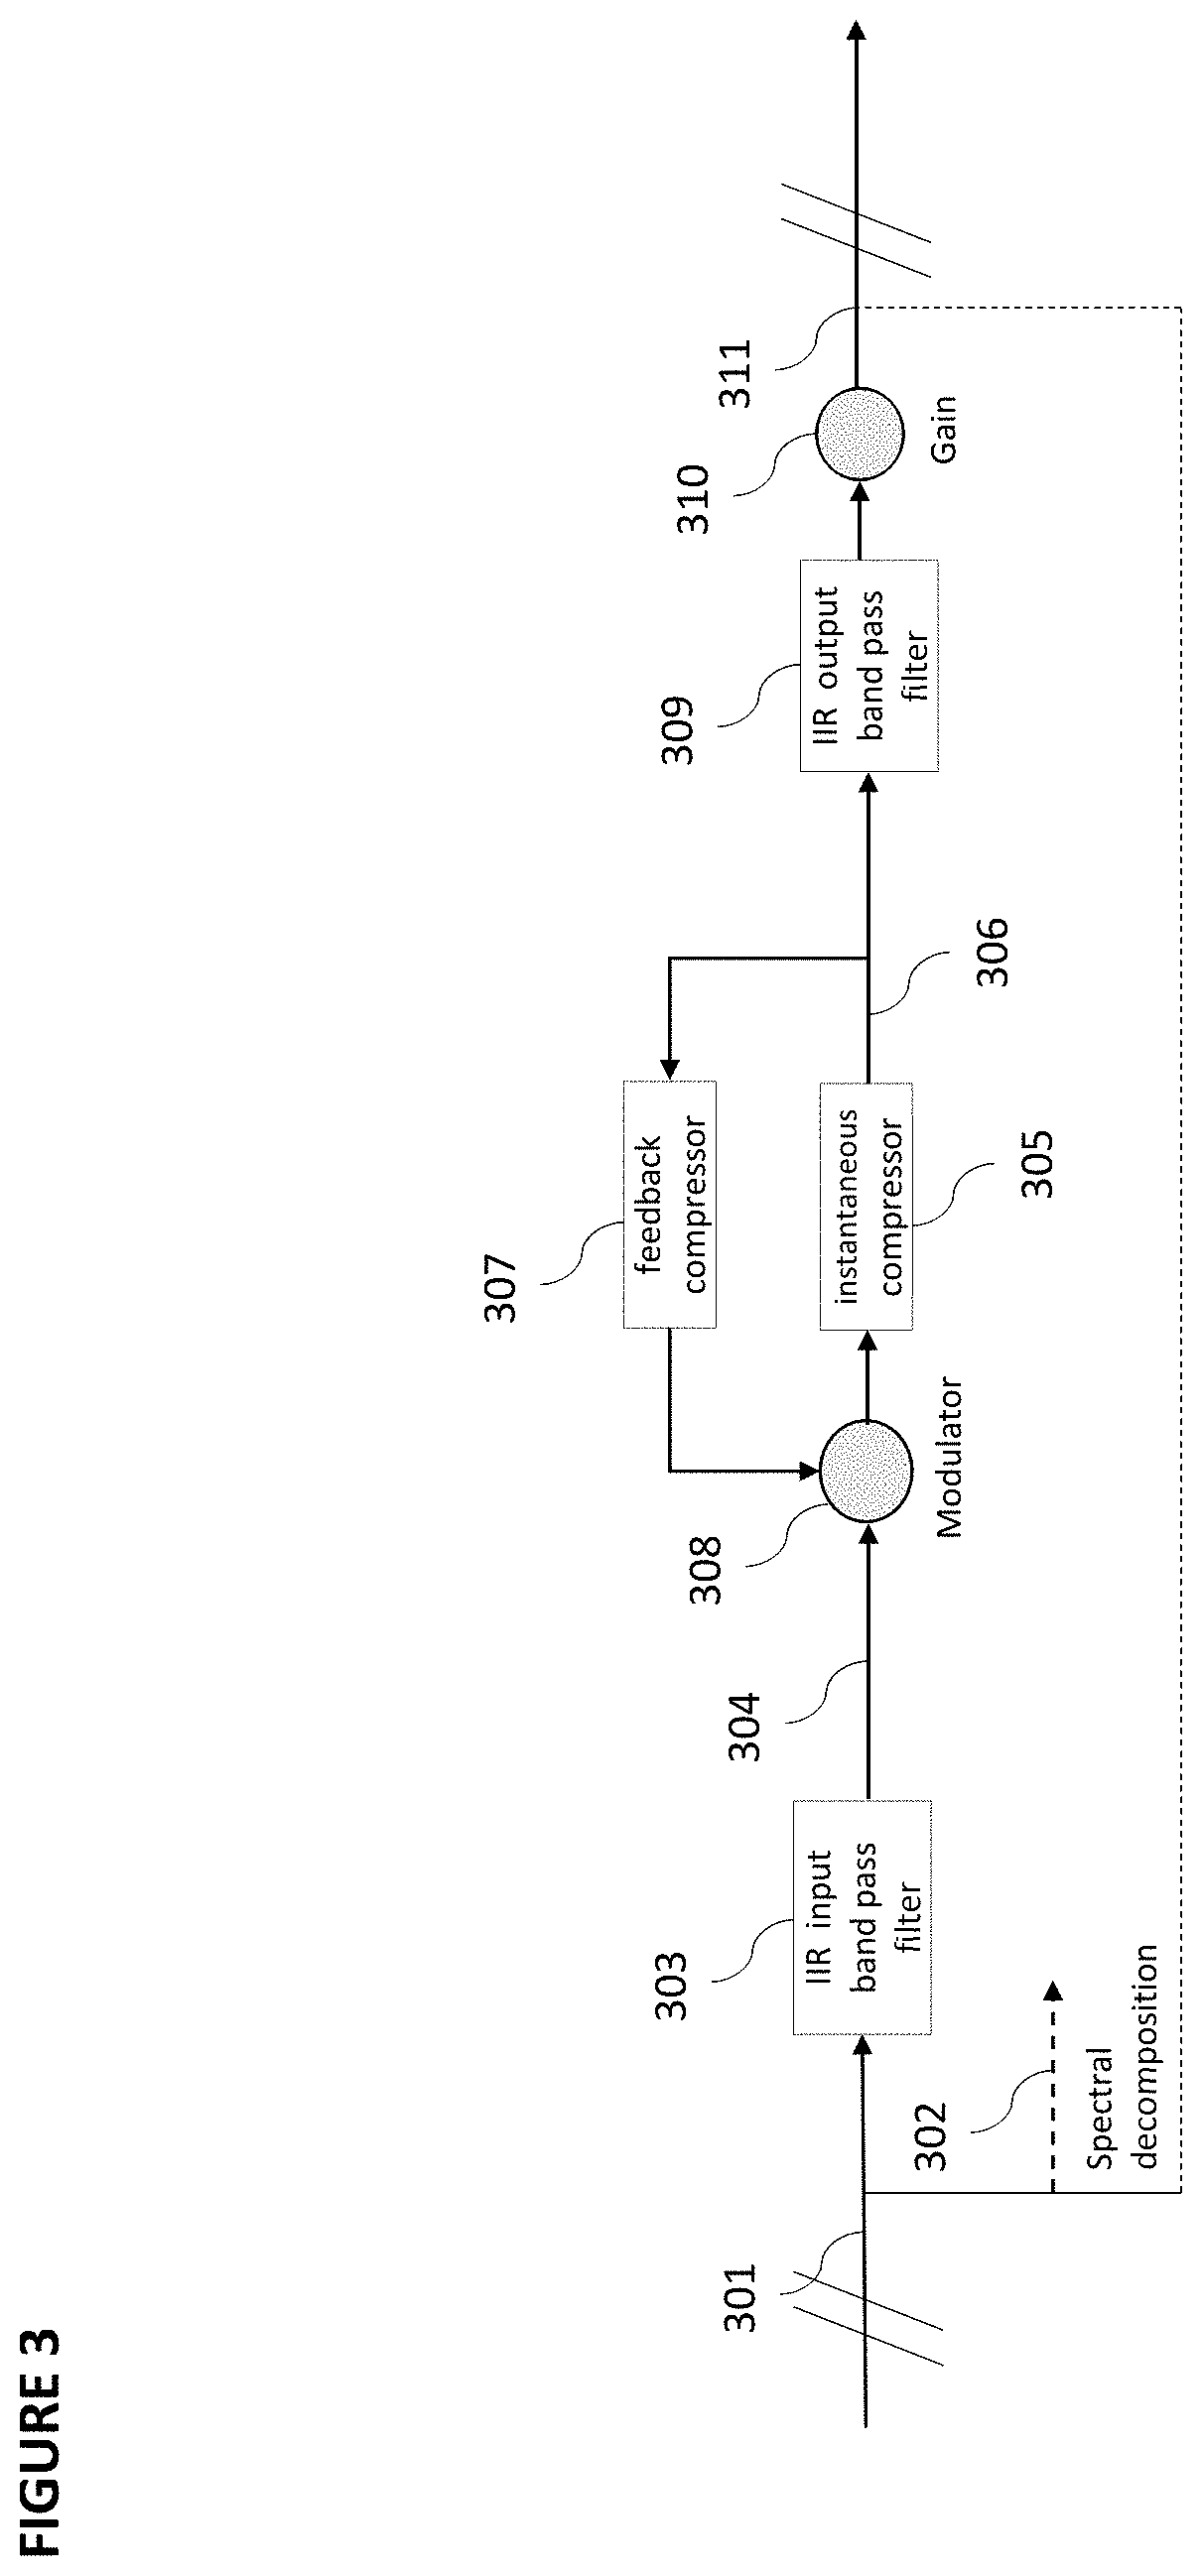 Systems and methods for processing an audio signal for replay on an audio device